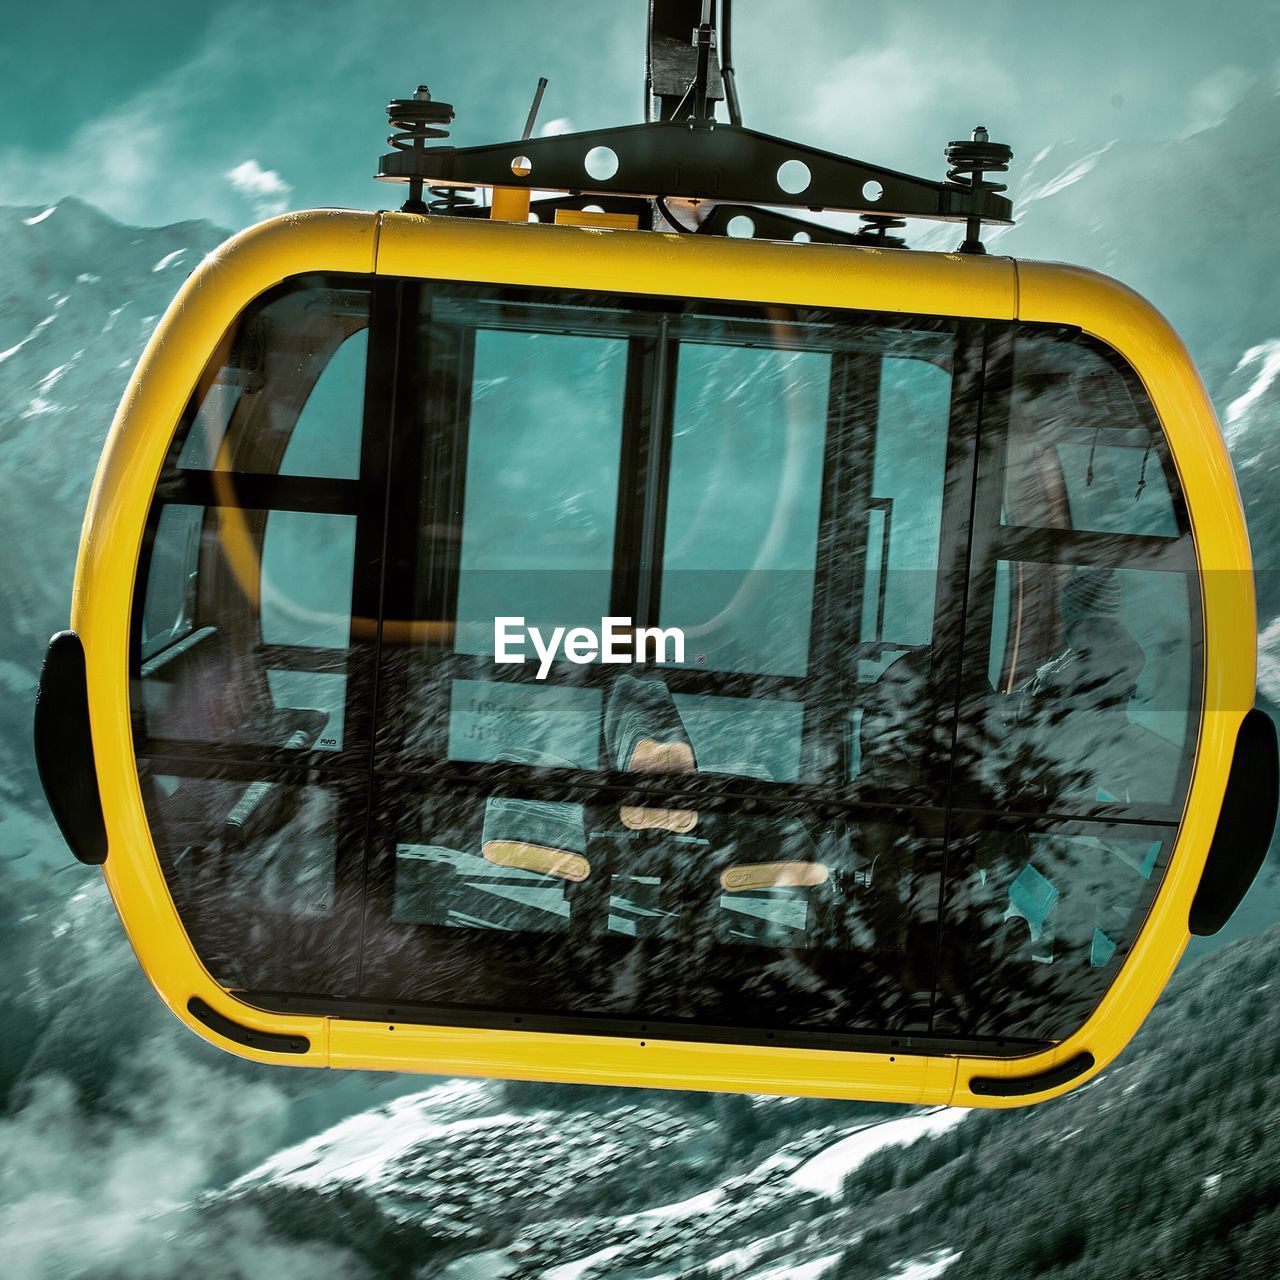 Overhead cable car during winter